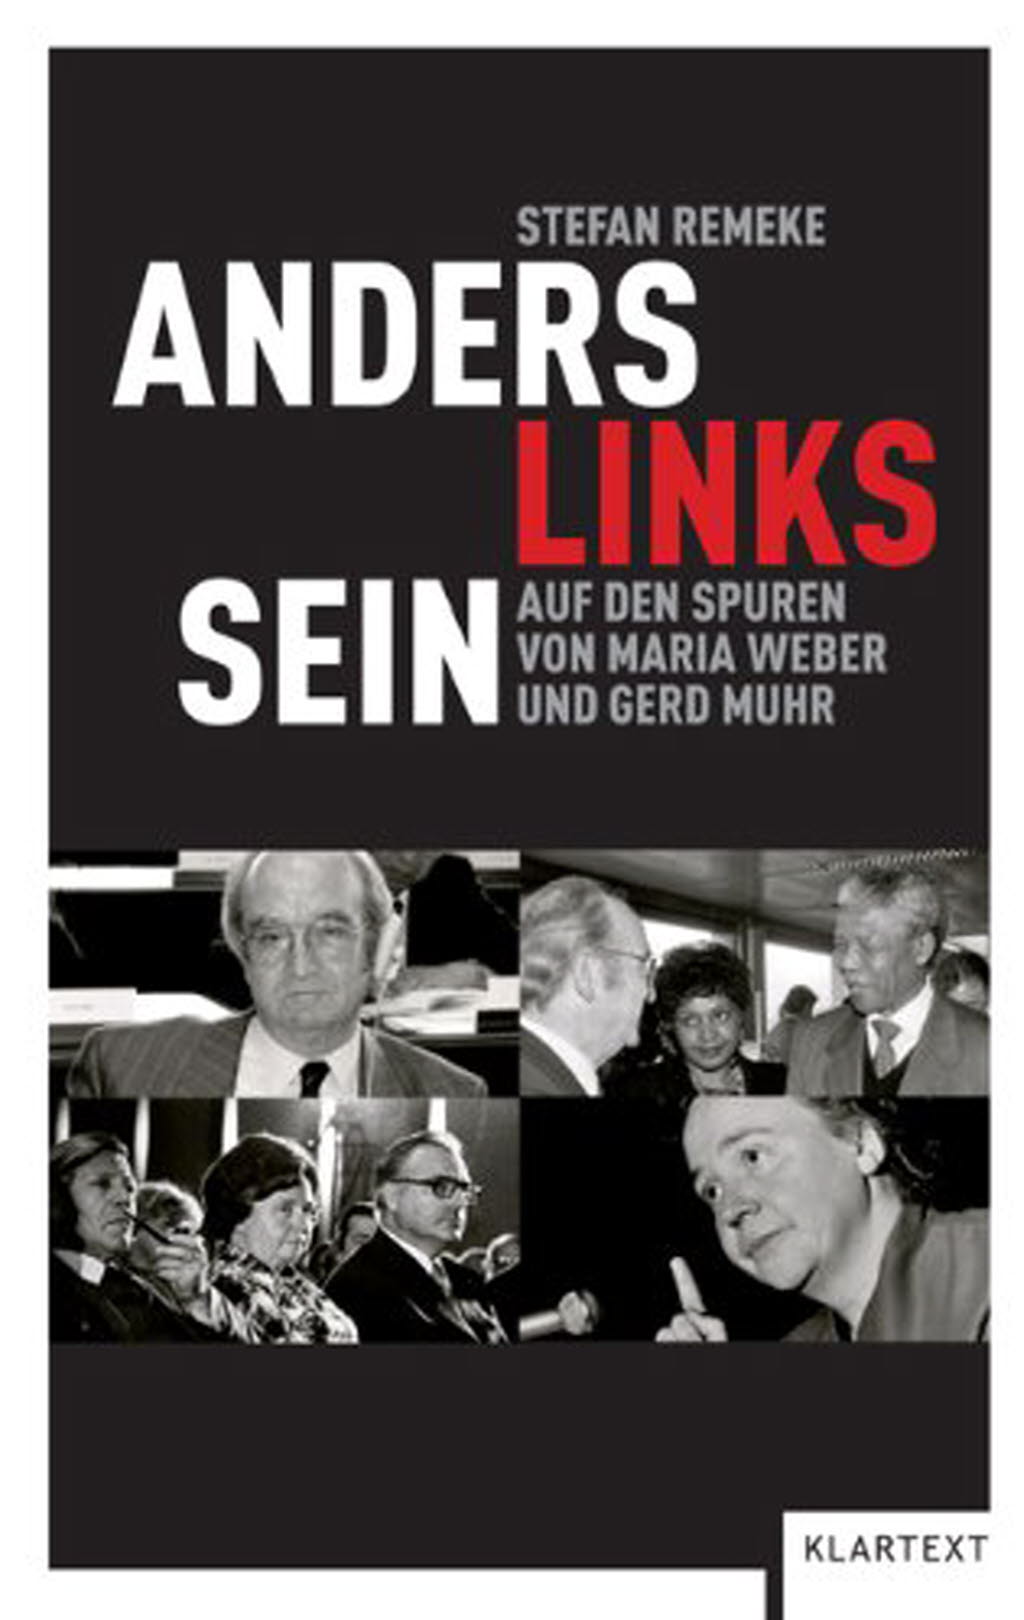 Anders links sein